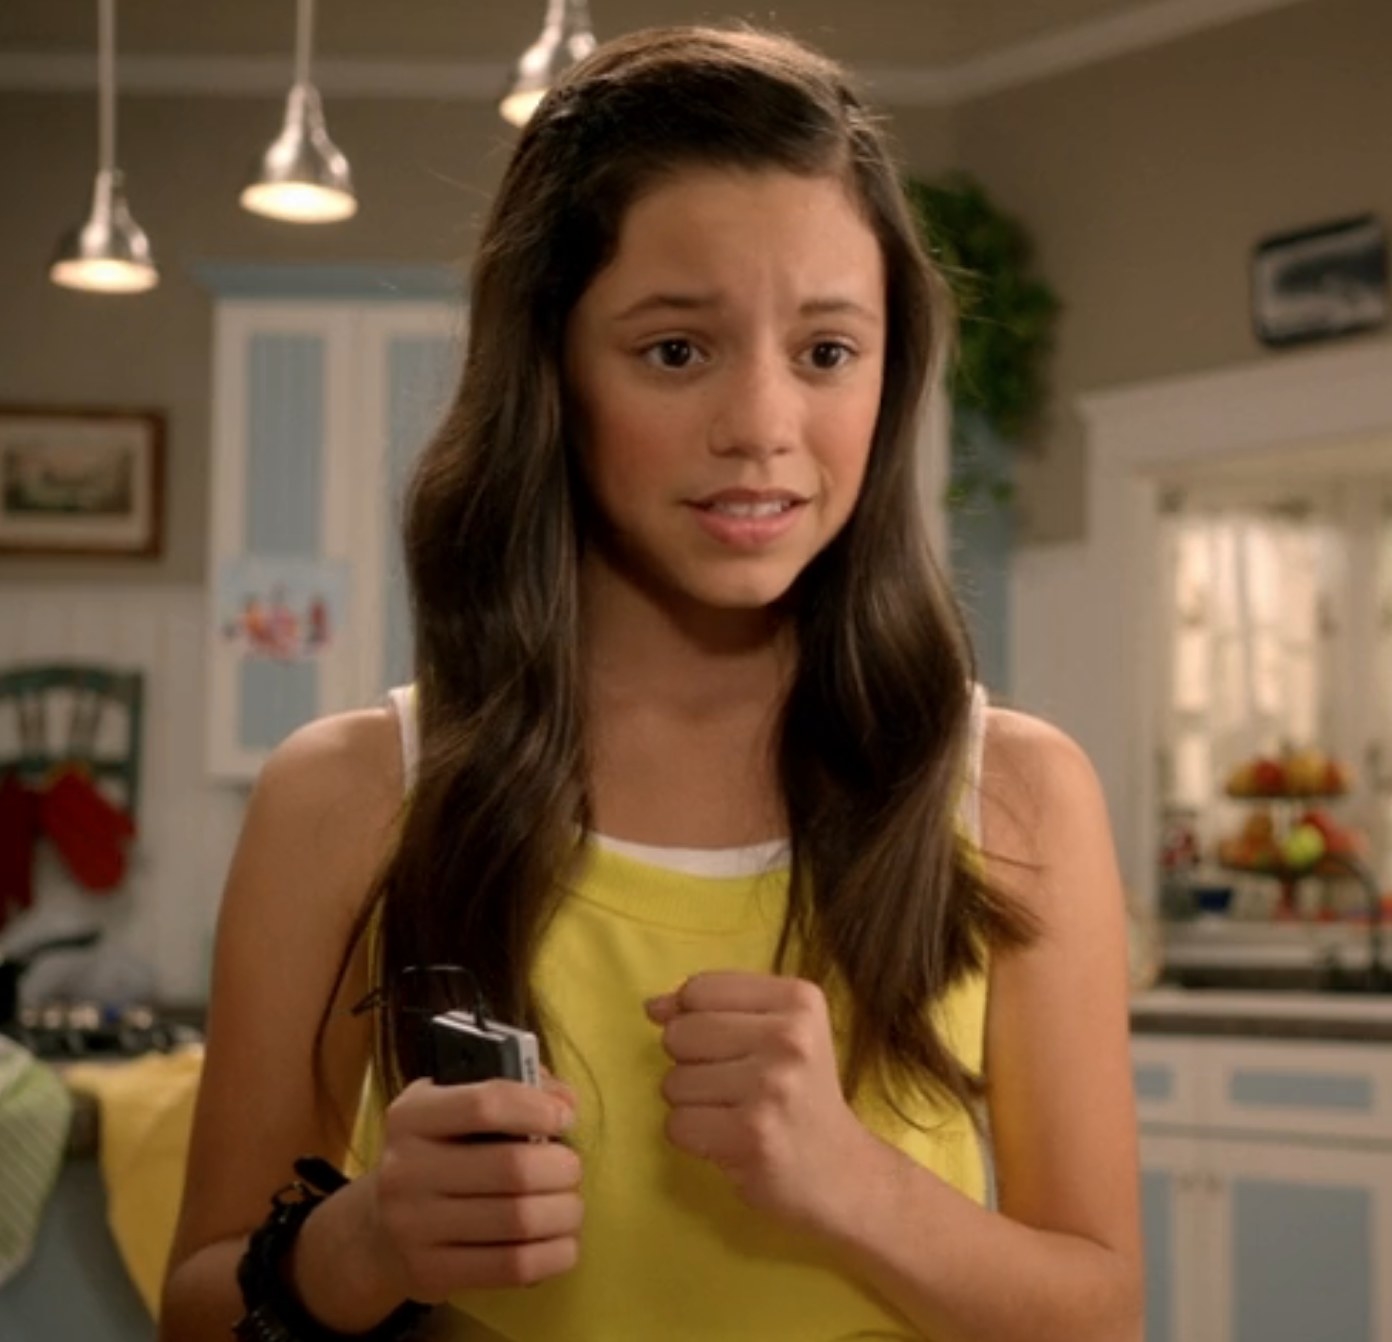 Jenna Ortega as Harley talks to her mom in their kitchen